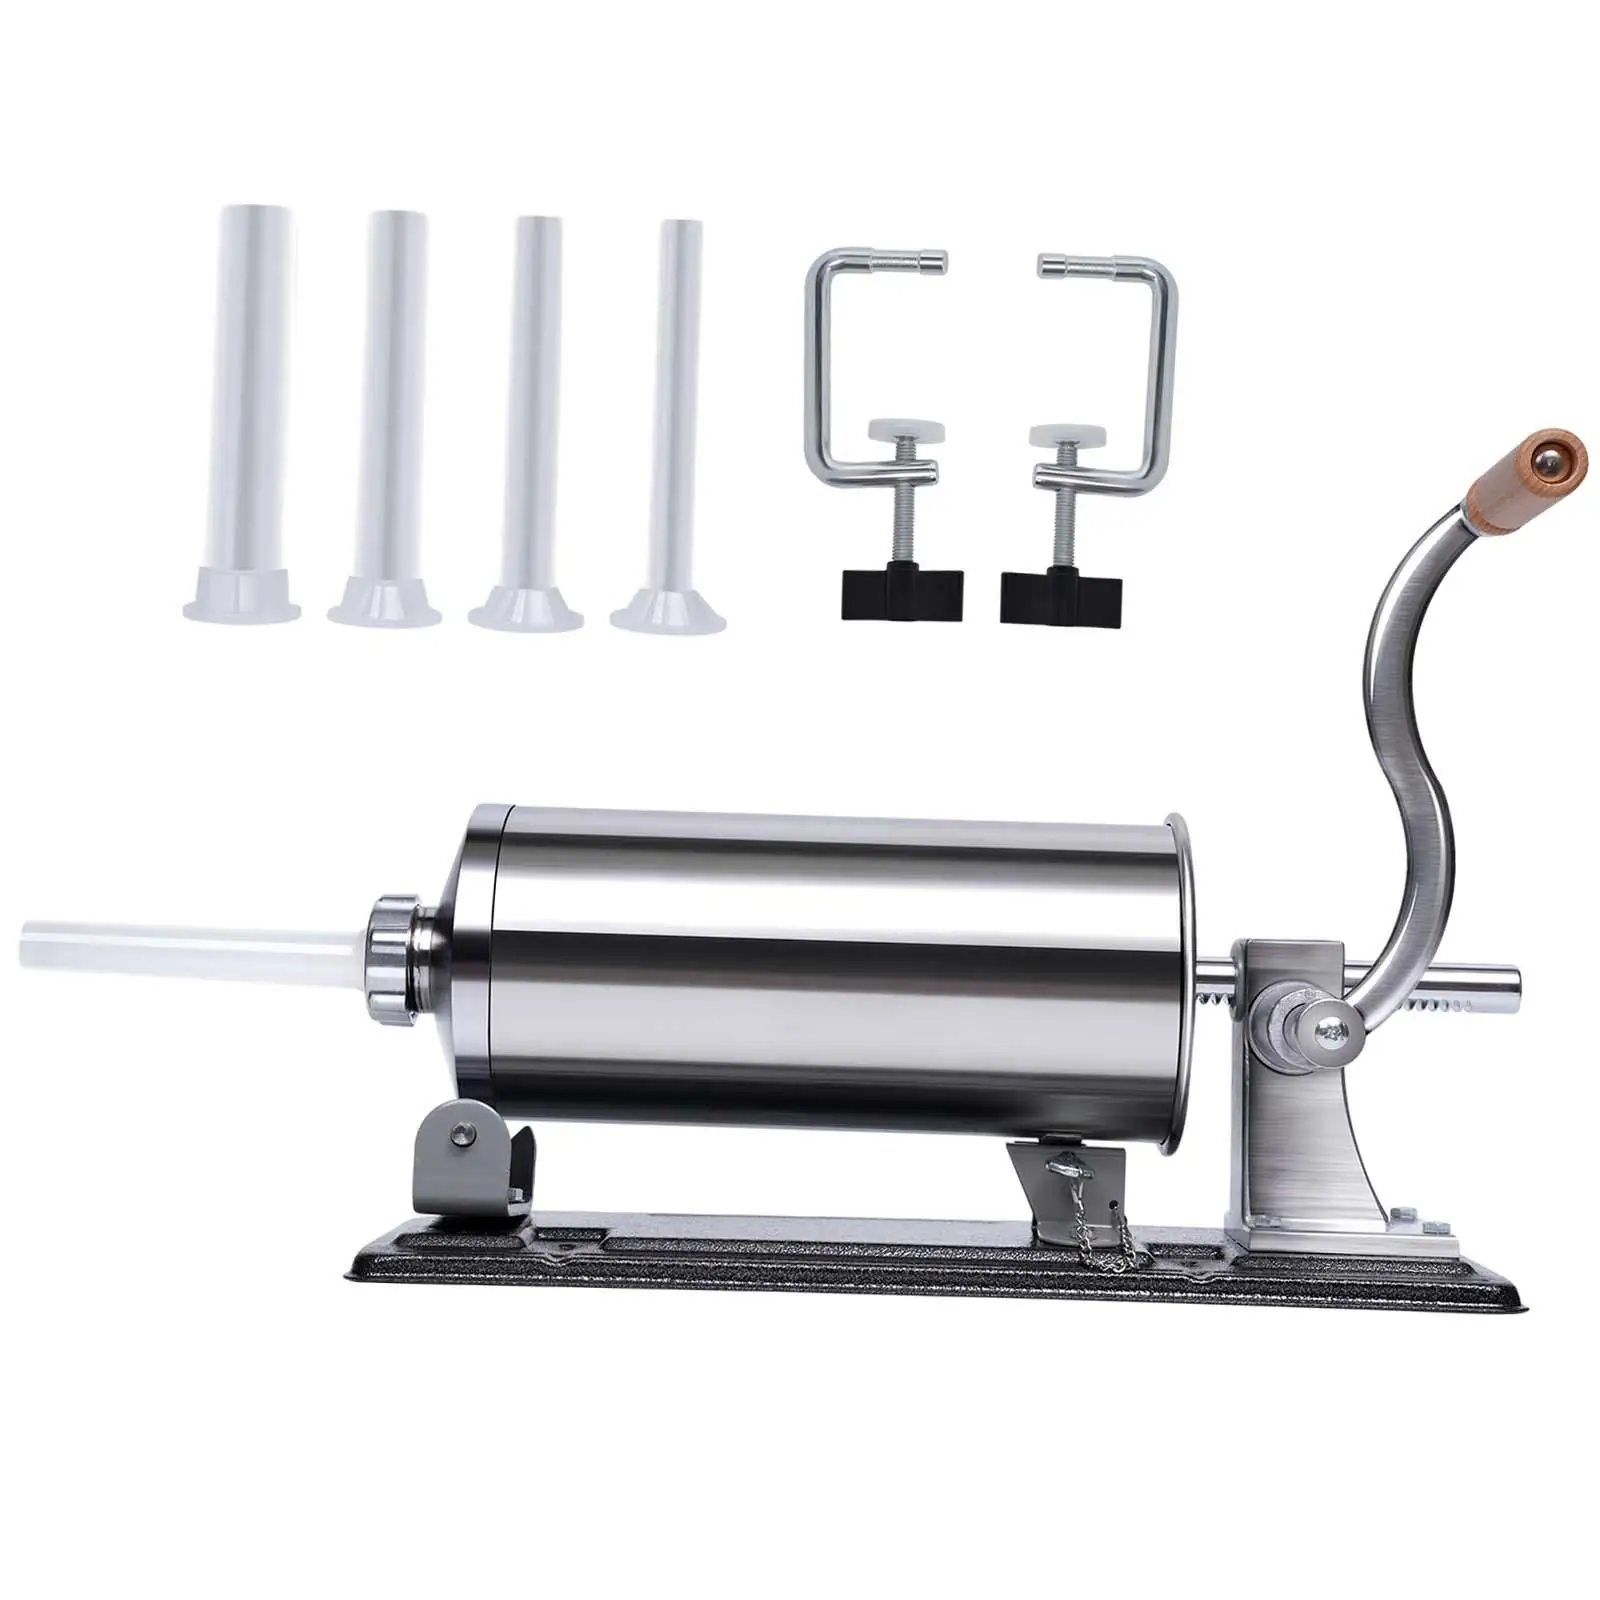 Homemade Sausage Machine with 4 Size Professional Filling Nozzles Attachment Sausage Stuffer for Kitchen Sausage Household Meat